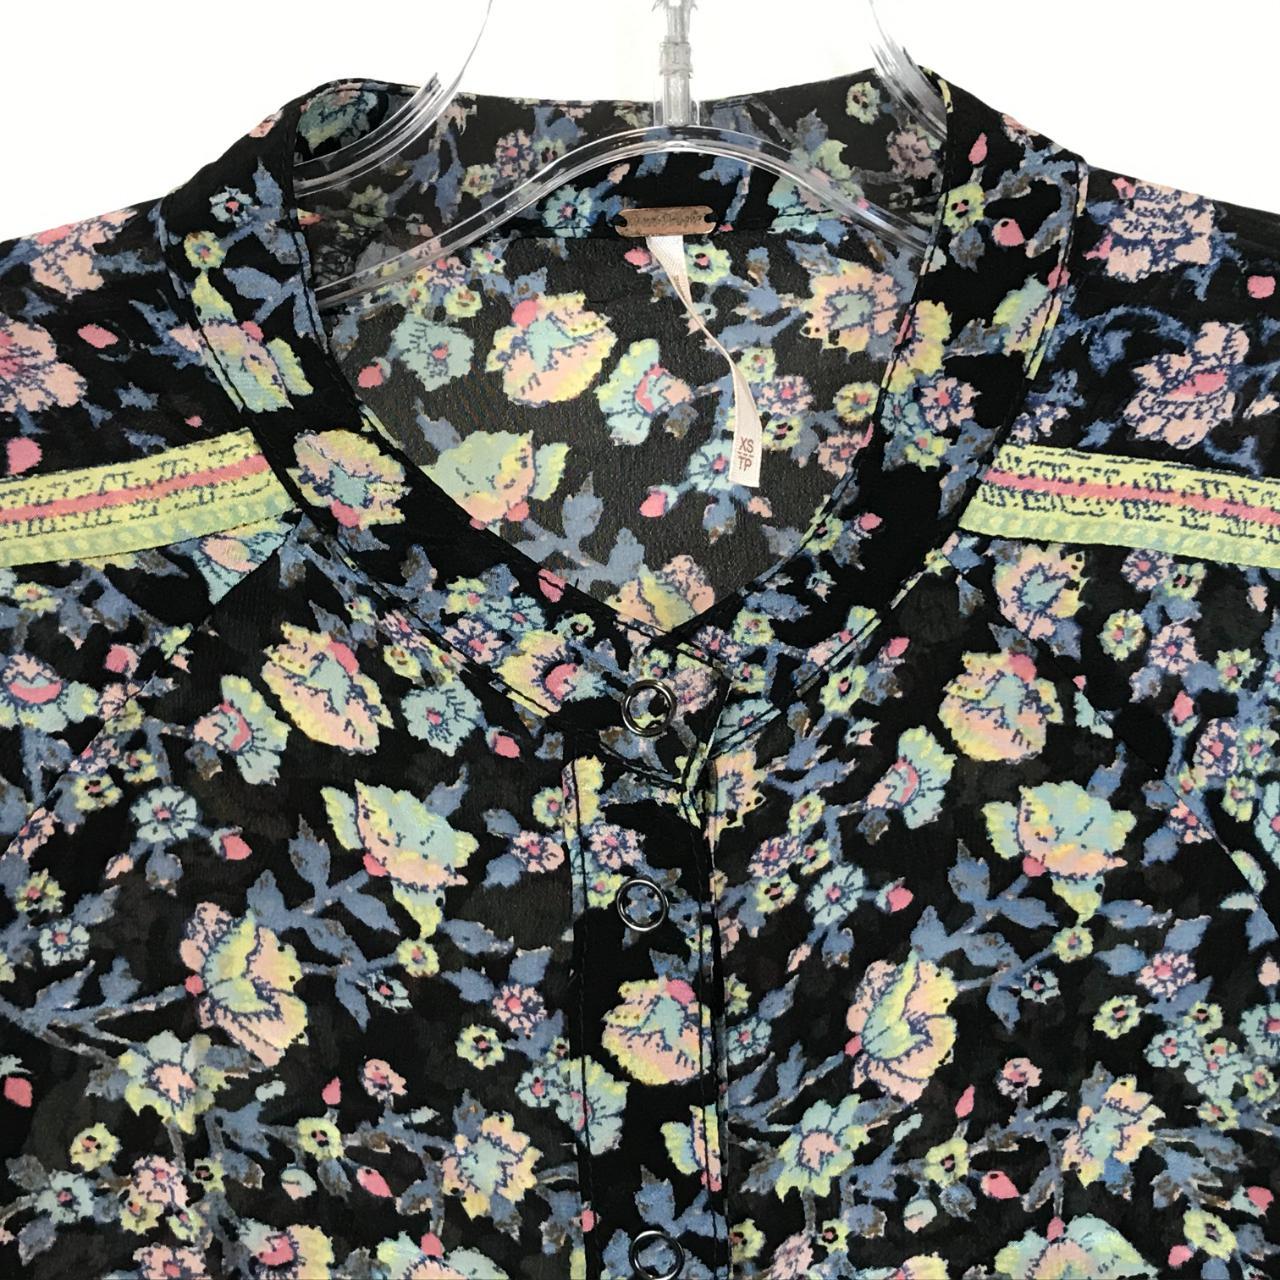 Product Image 2 - Skyway Drive In Blouse
Anthropologie -